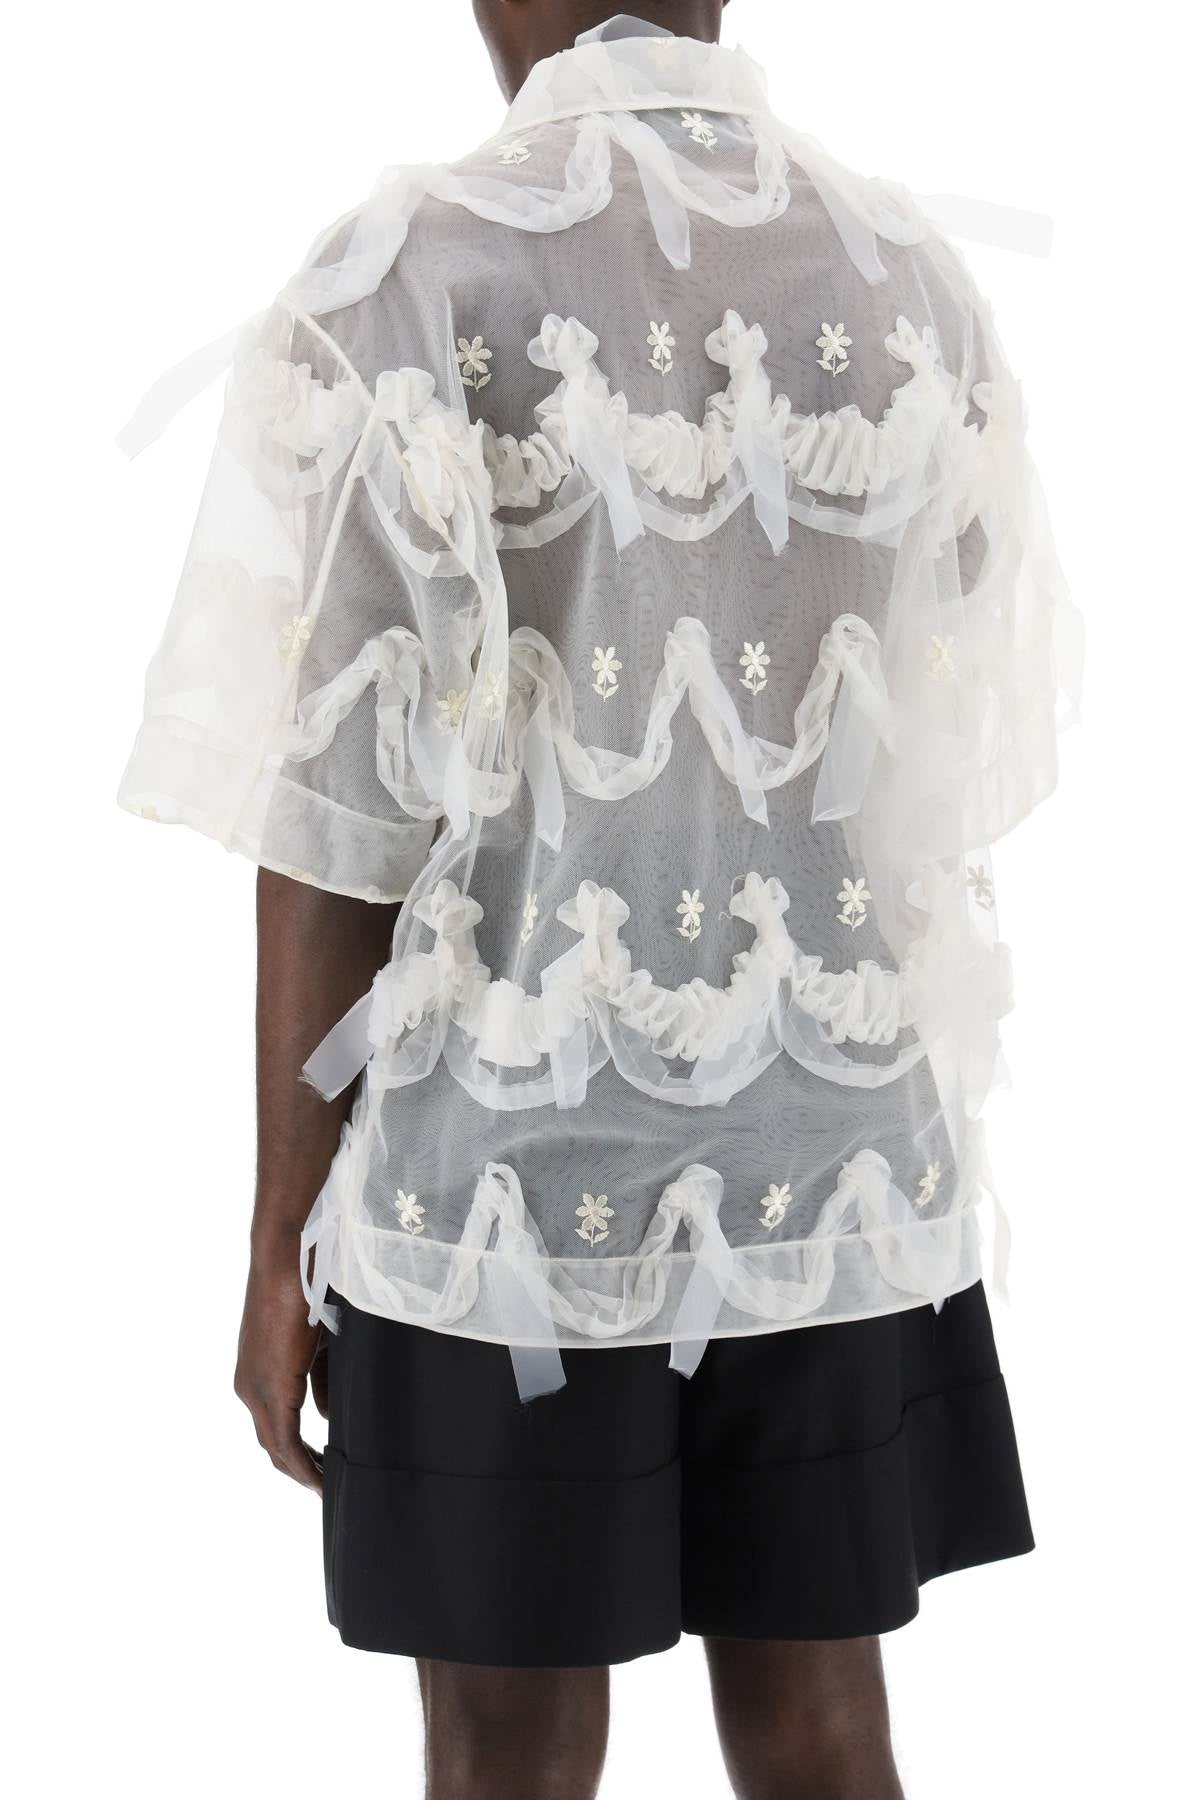 Simone Rocha Simone rocha "tulle shirt with embroidered details"